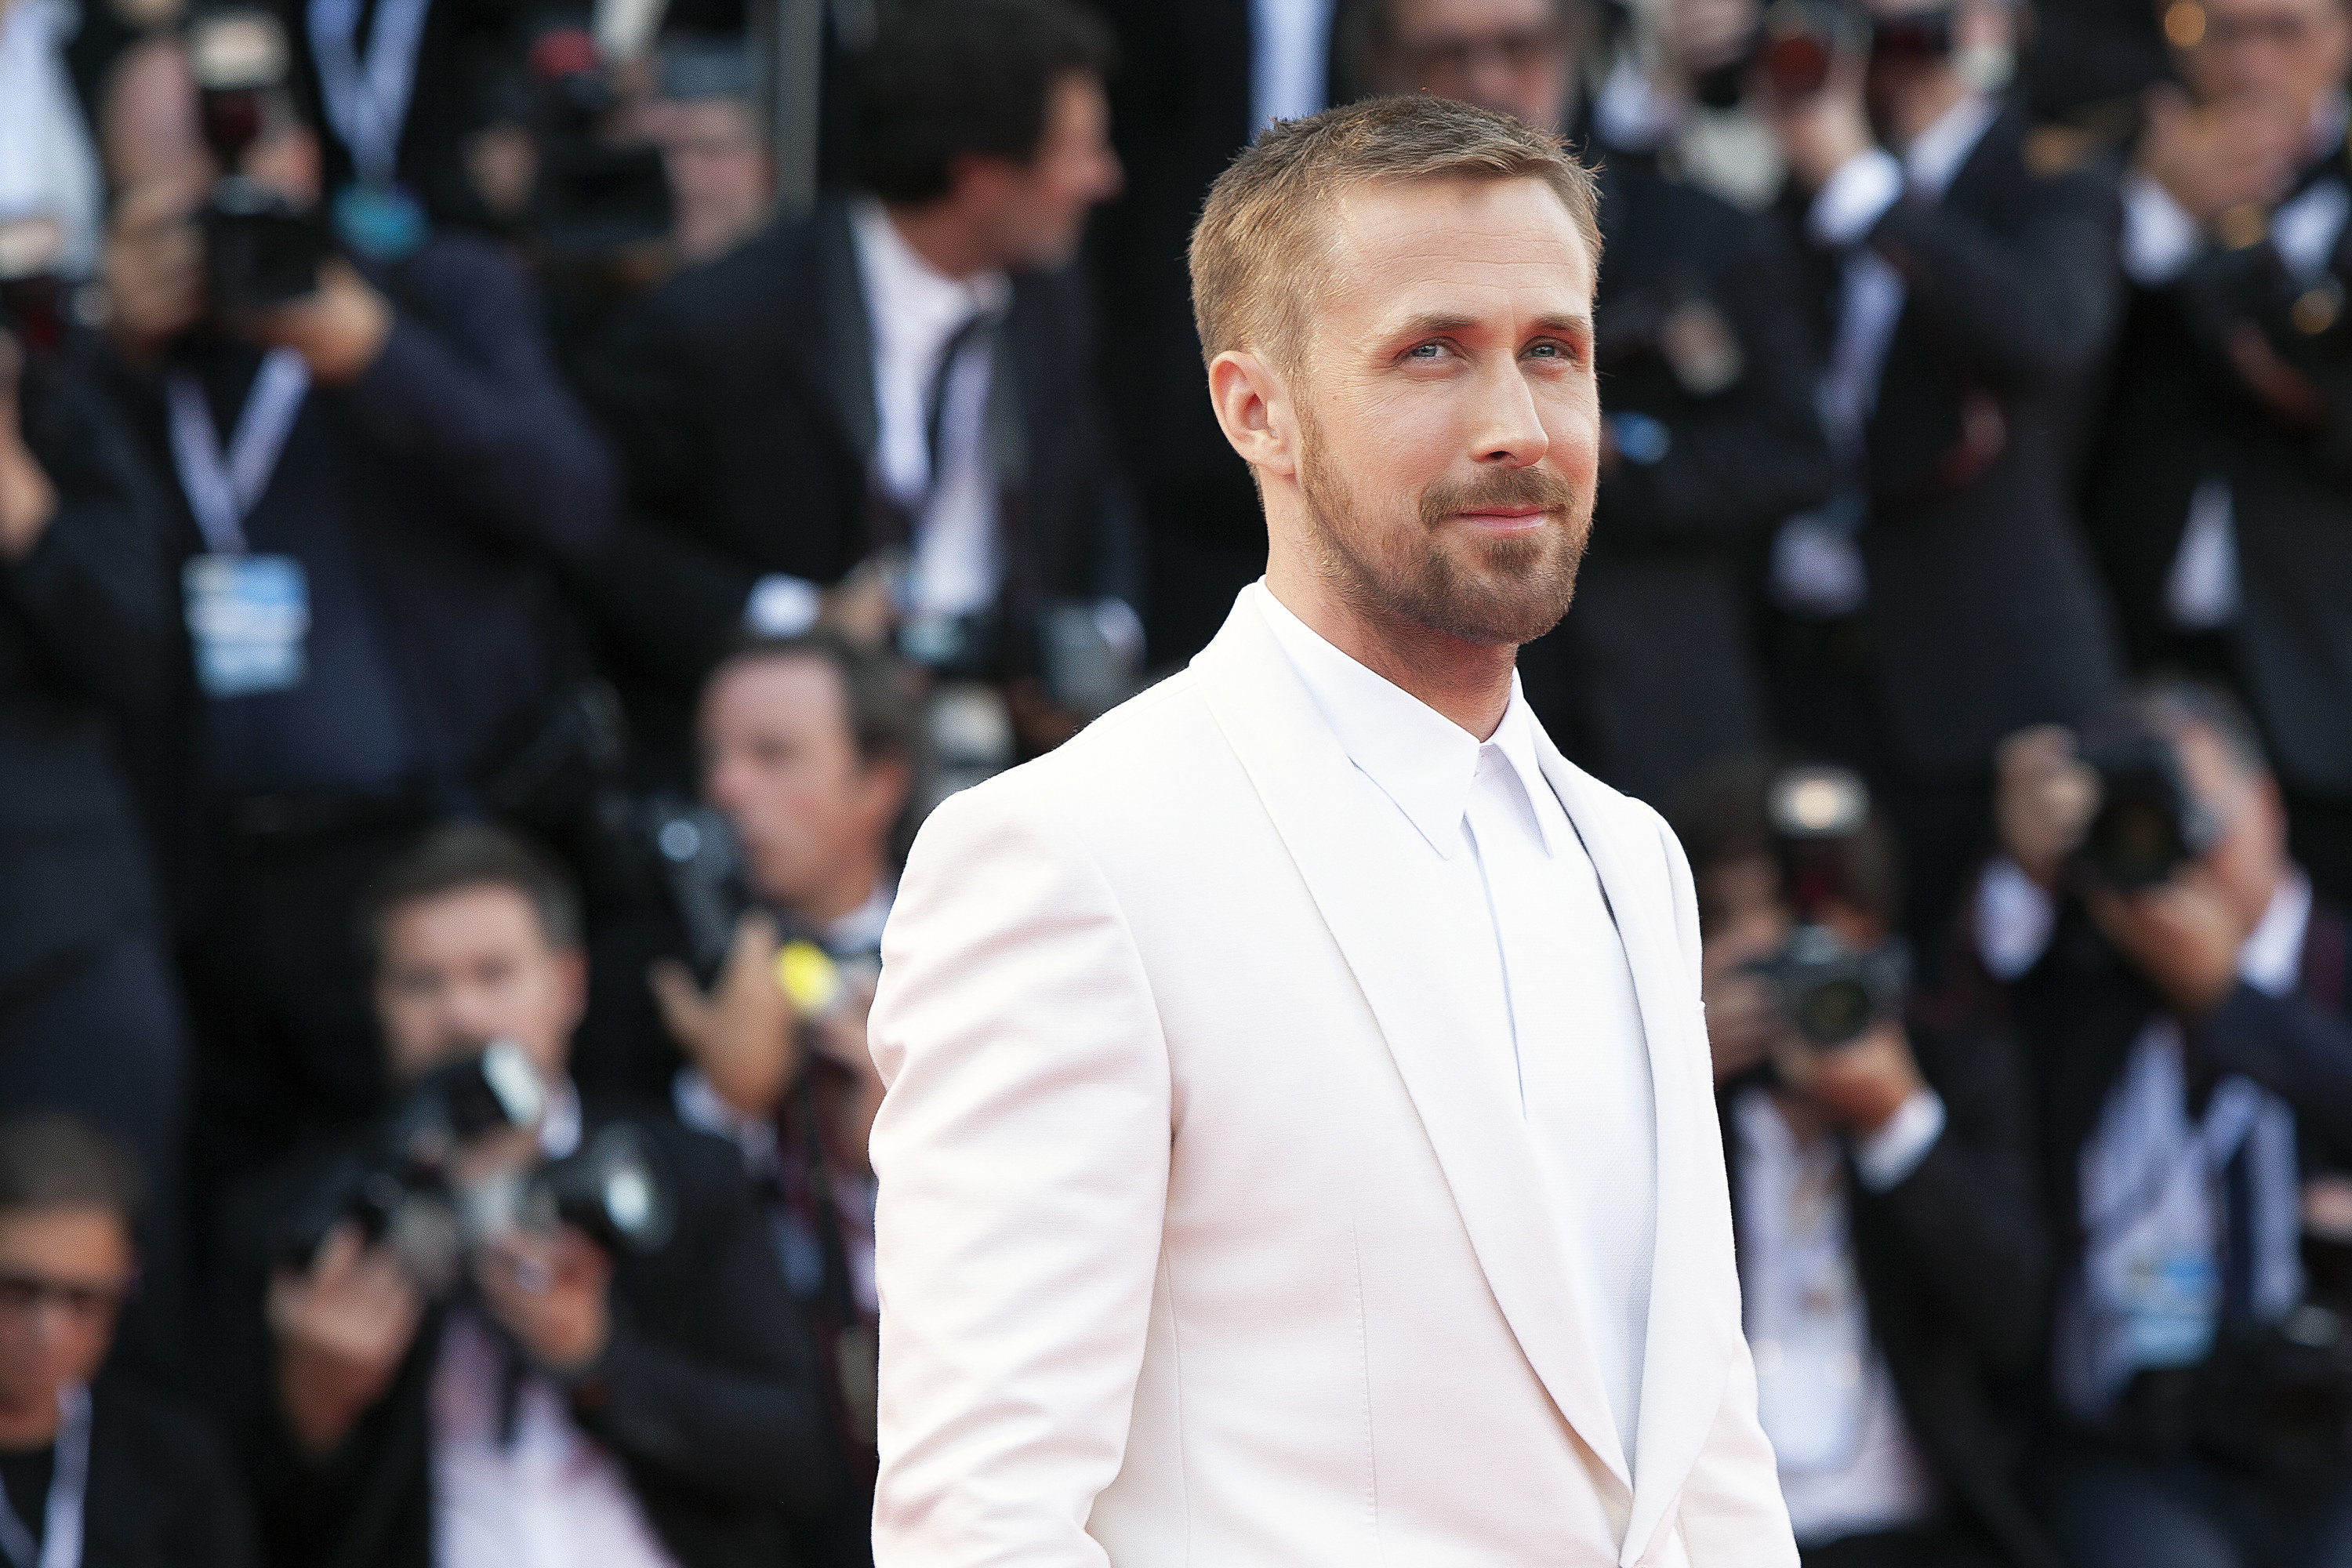 Ryan Gosling smiling for cameras on the red carpet